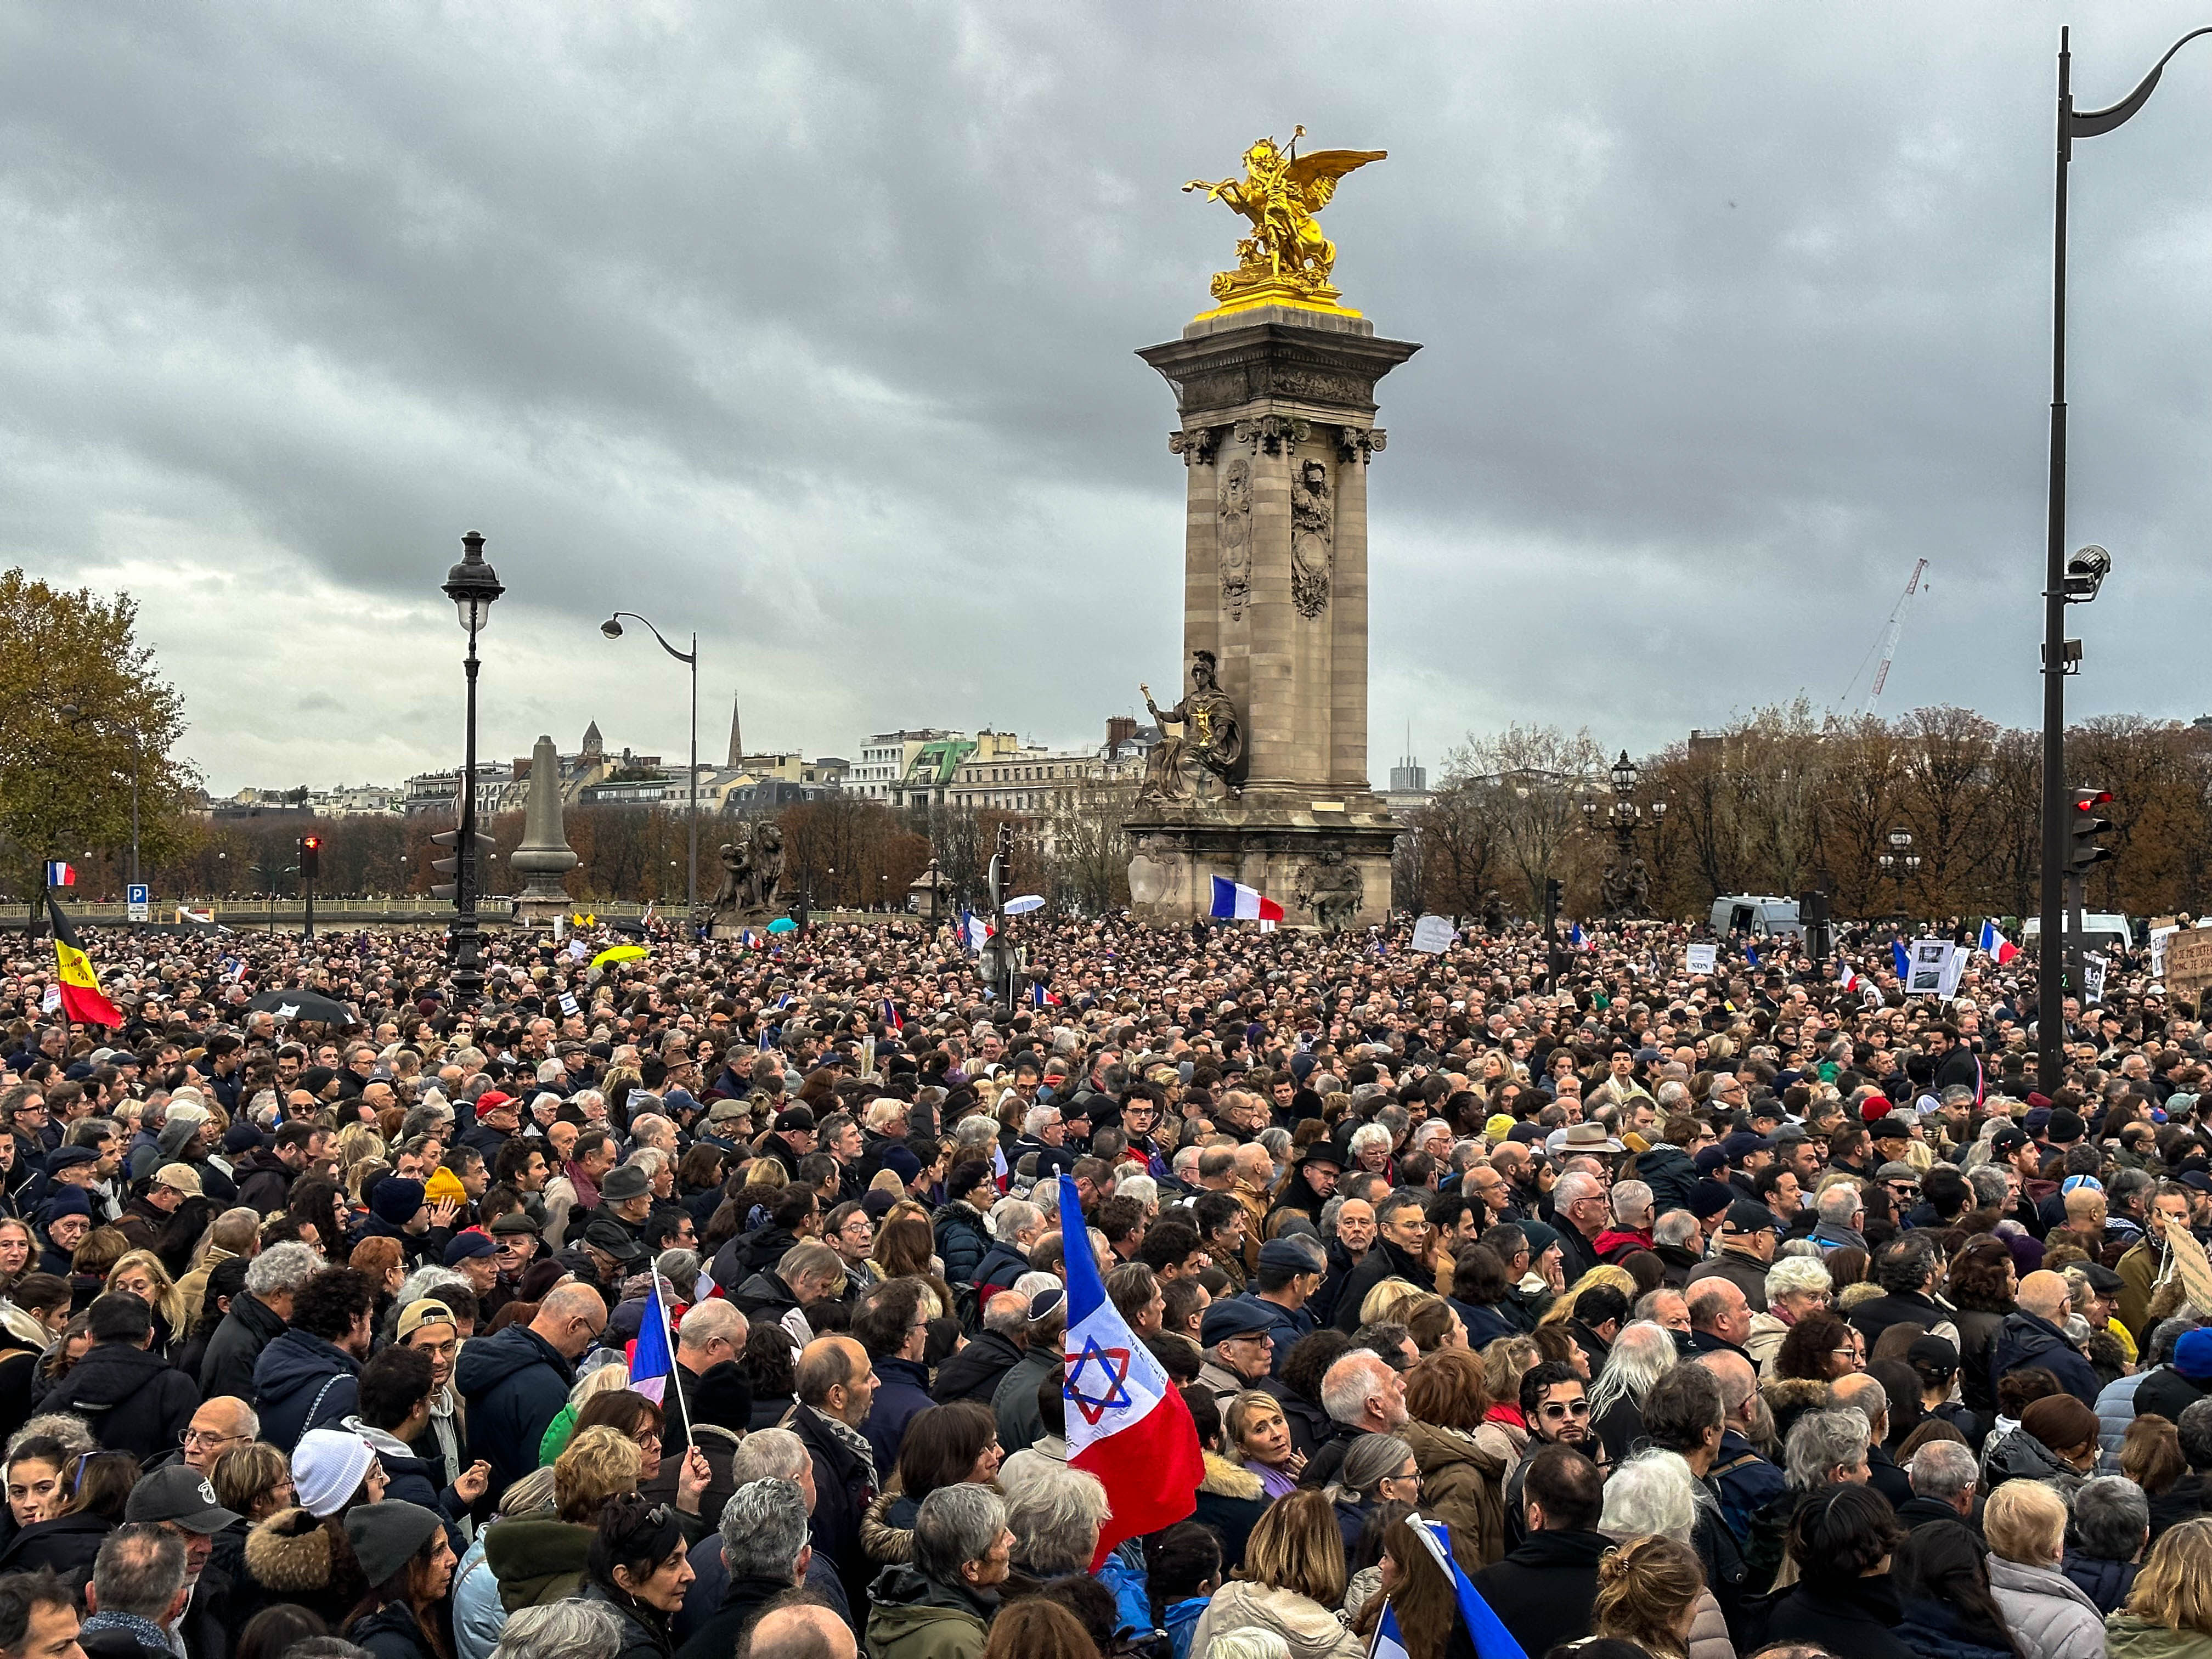 People take part in a rally against anti-Semitism in Paris, France on Sunday. Photo: Le Pictorium via Zuma Press / dpa